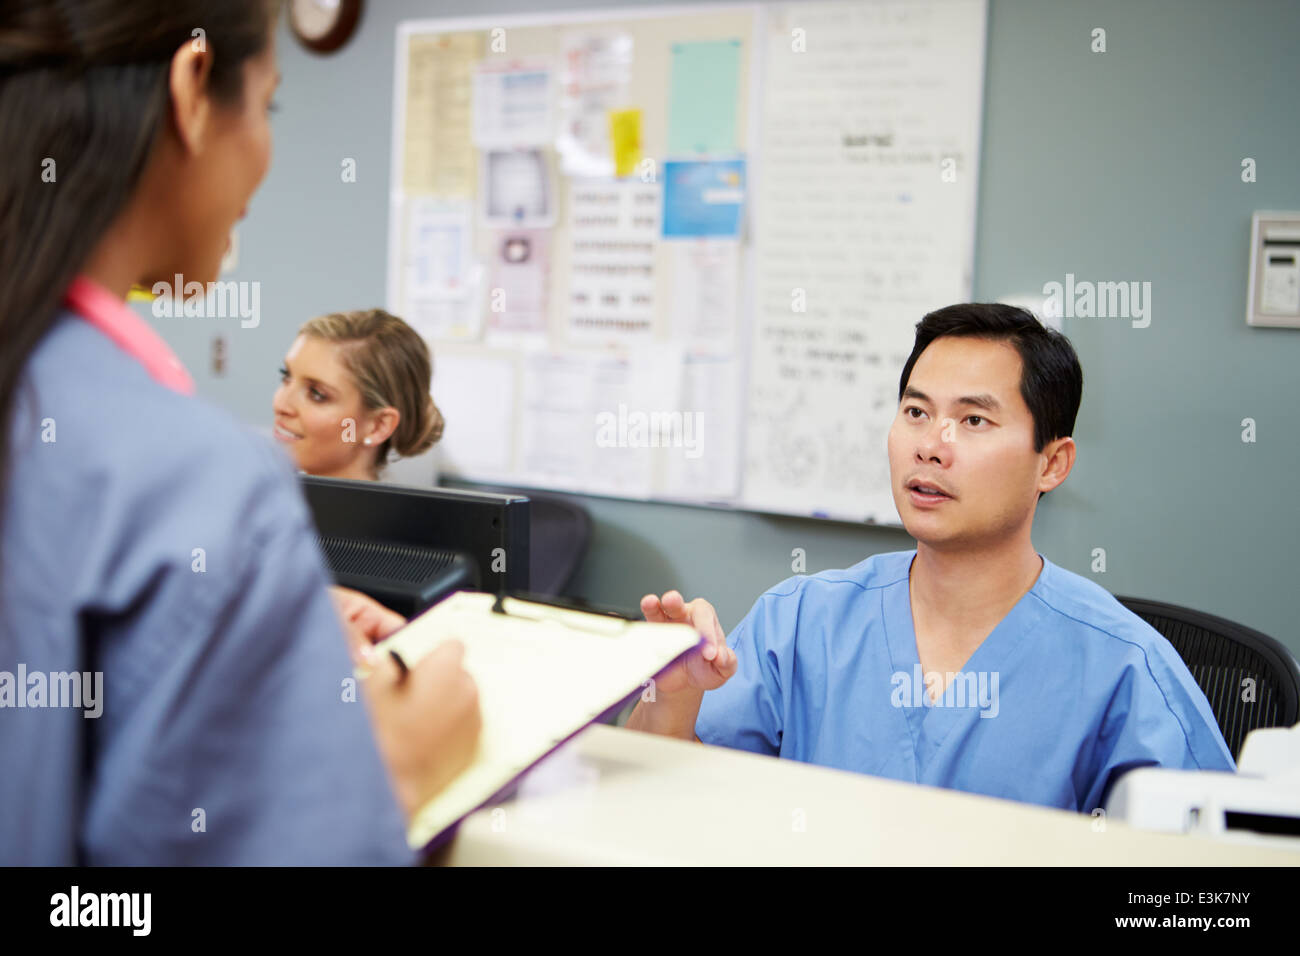 Male And Female Nurse In Discussion At Nurses Station Stock Photo